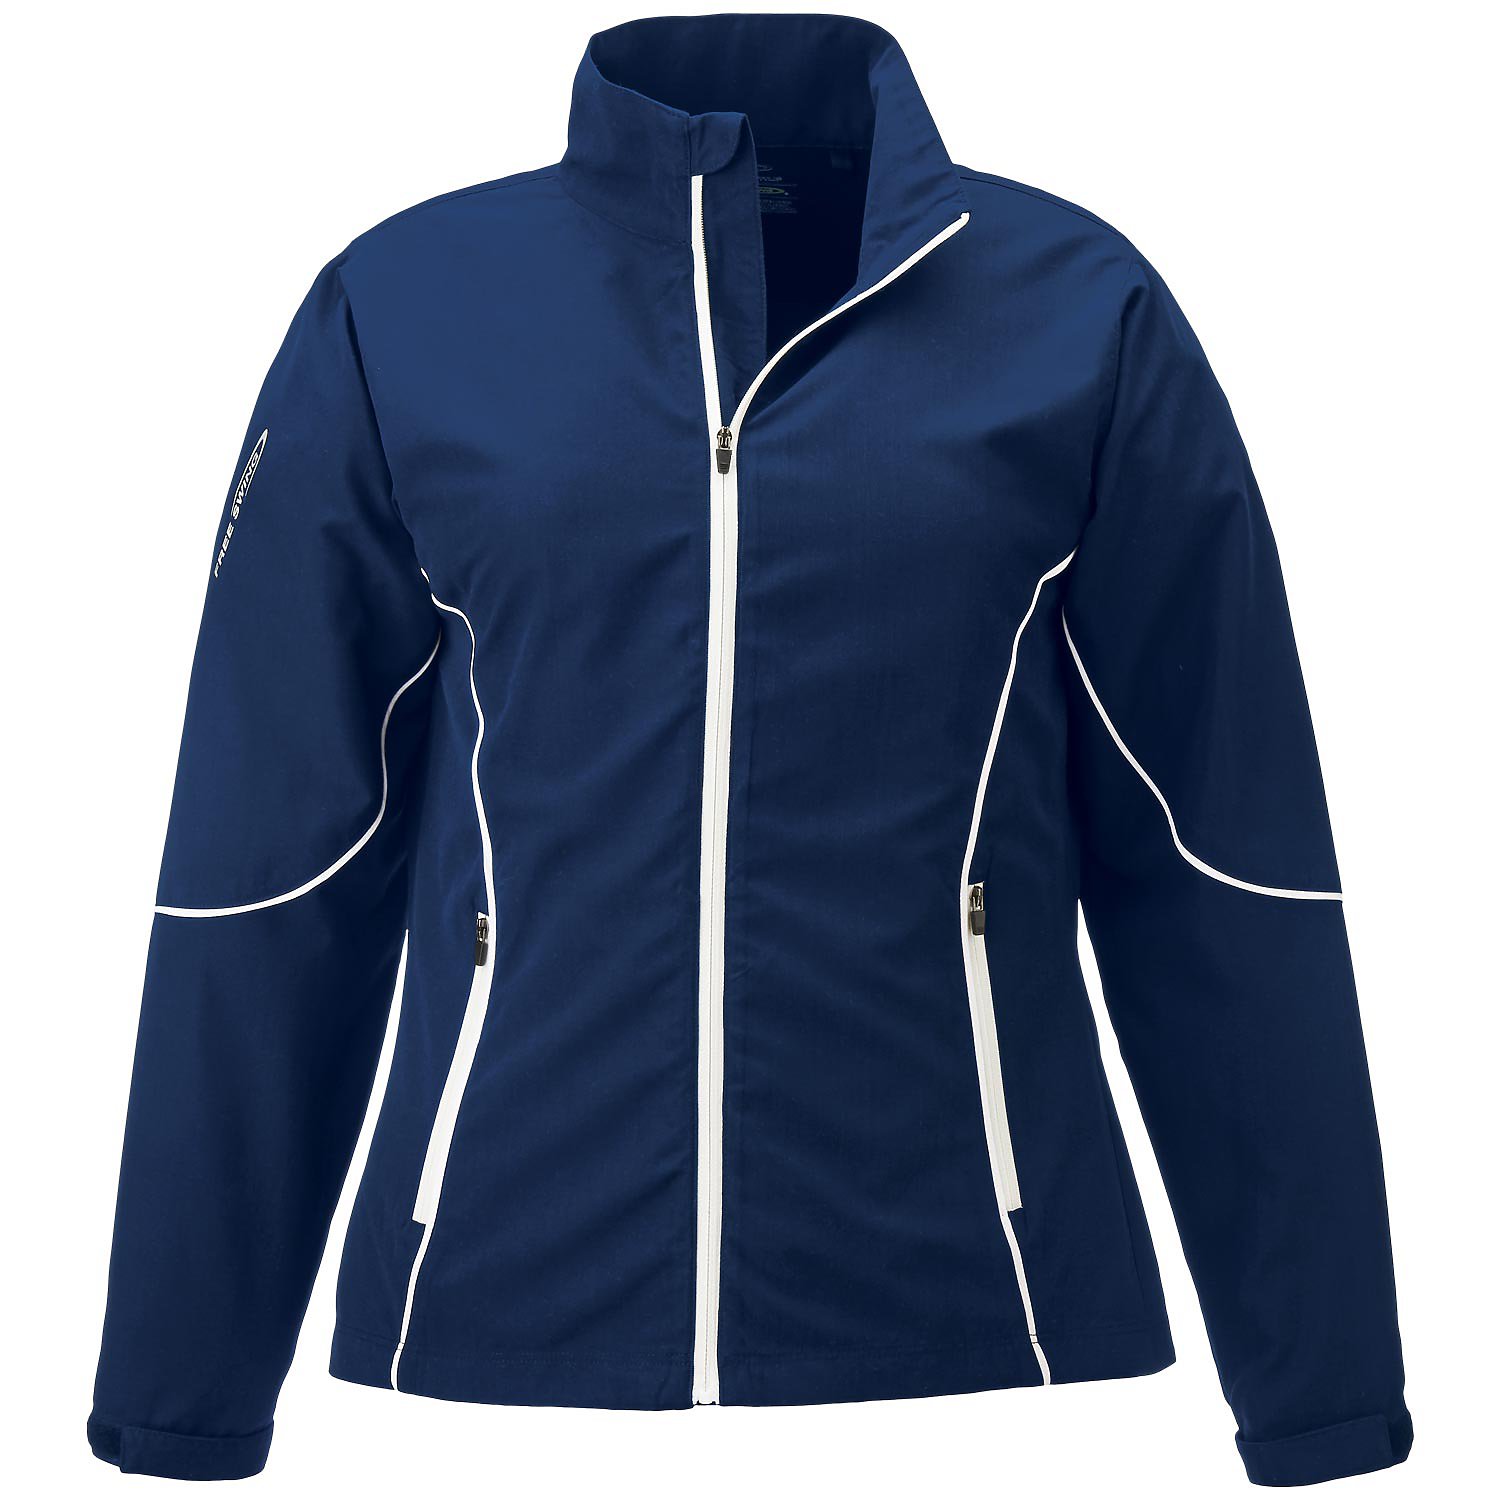 Page & Tuttle P1987 - Women's Piped Full-Zip Windshirt